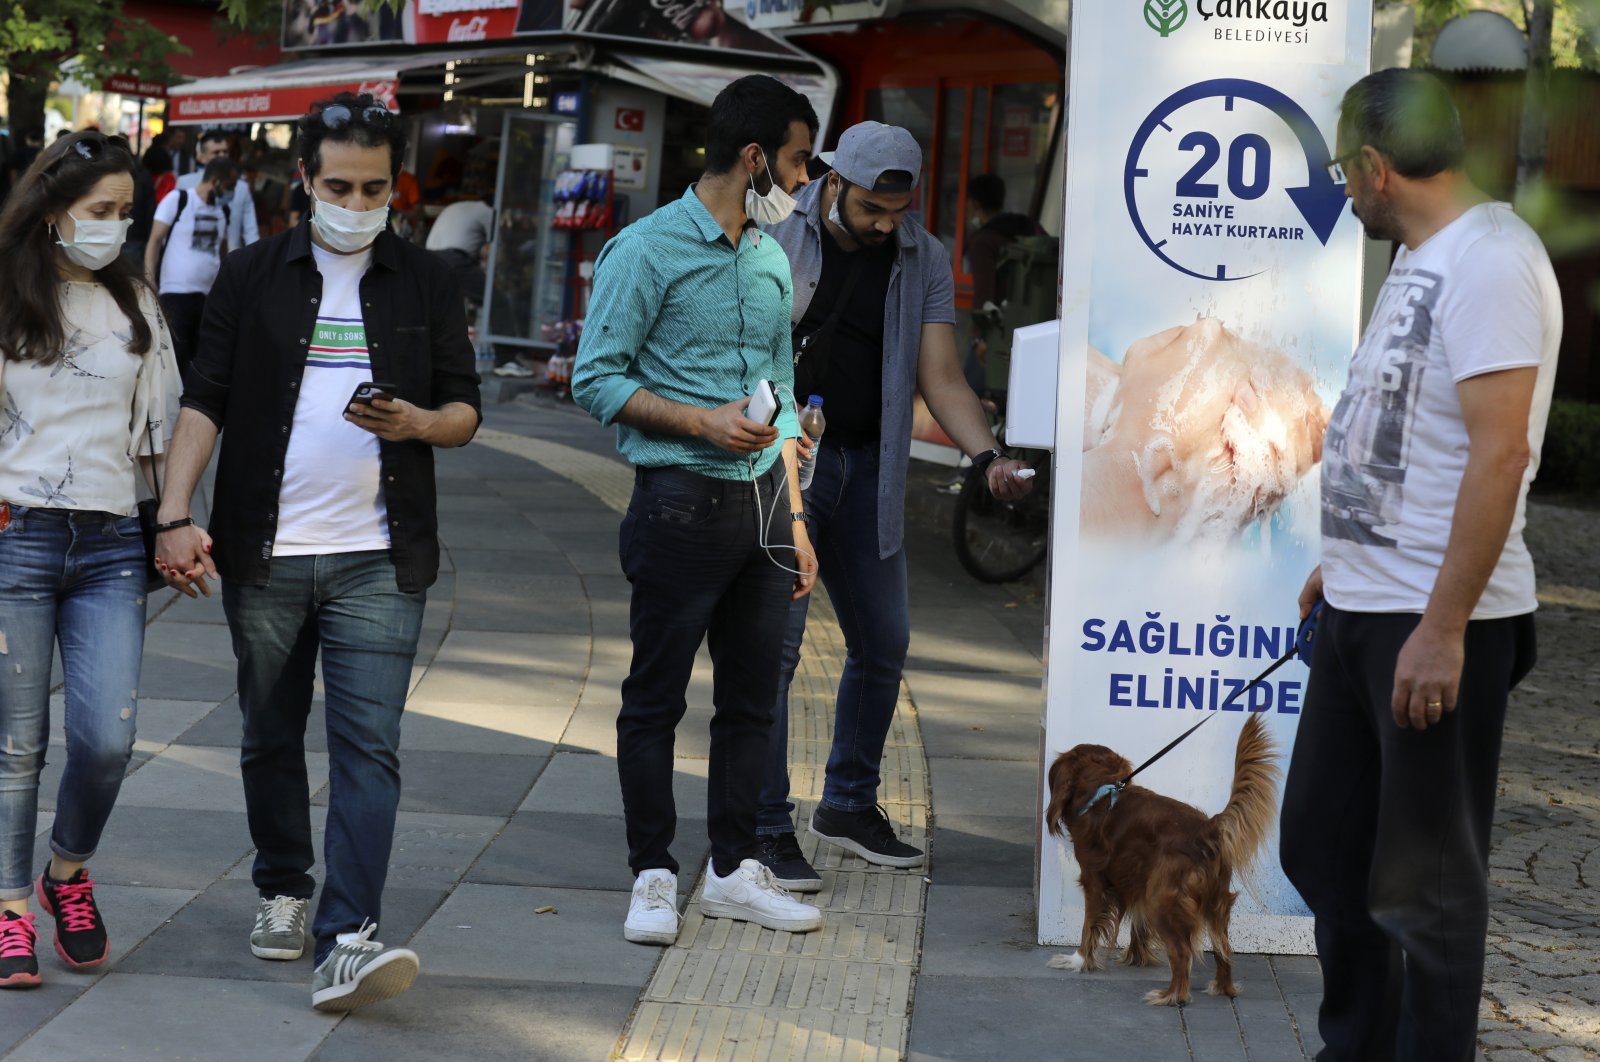 People wearing face masks use disinfectant at the entrance of a public garden, in Ankara, Turkey, June 14, 2020. (AP Photo)